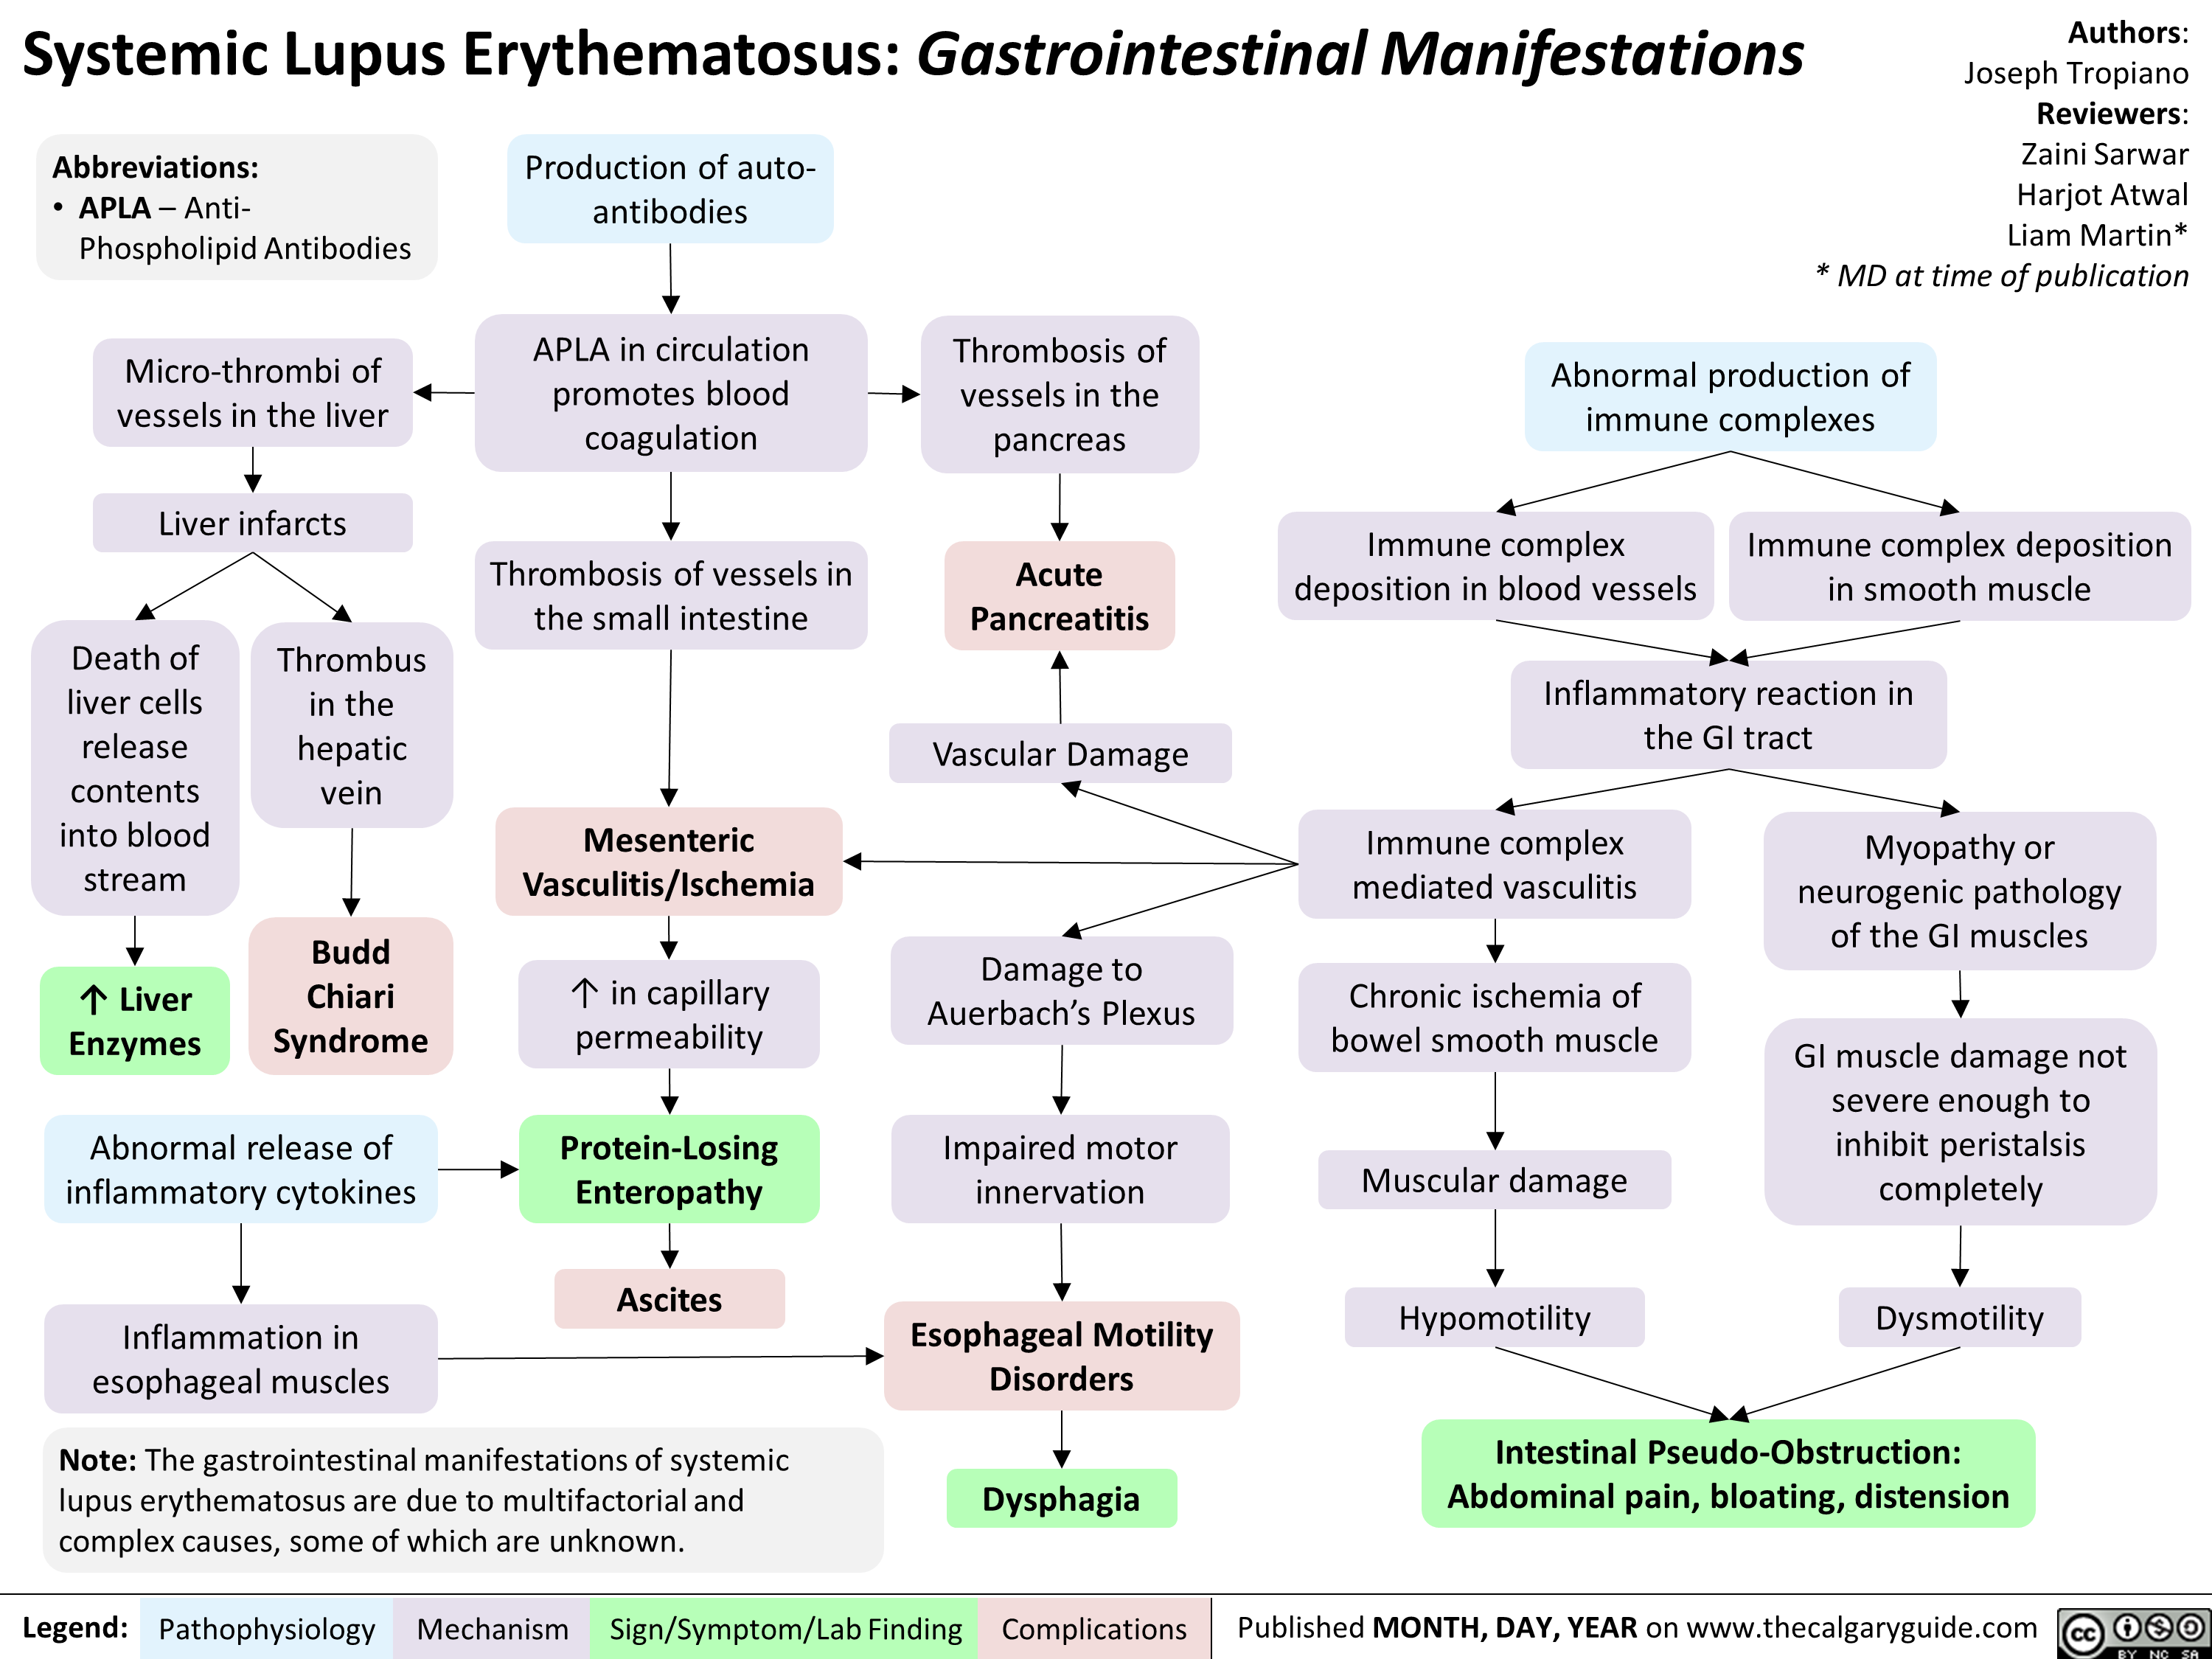 Systemic Lupus Erythematosus: Gastrointestinal Manifestations 
Abbreviations: • APLA Phospholipid — Anti-Antibodies 1— Production of auto-antibodies APLA in circulation promotes blood coagulation —01• Thrombosis of vessels in the pancreas Micro-thrombi of vessels in the liver Liver infarcts Thrombosis of vessels in the small intestine Acute Pancreatitis Death of liver cells release contents into blood stream Thrombus in the hepatic vein • Vascular Damage Mesenteric Vasculitis/Ischemia Budd Chiari Syndrome Damage to Auerbach's Plexus 11` Liver Enzymes 1` in capillary permeability 
Abnormal release of 
inflammatory cytokines 
1 
Inflammation in esophageal muscles 
Protein-Losing Enteropathy 
Ascites 
Note: The gastrointestinal manifestations of systemic lupus erythematosus are due to multifactorial and complex causes, some of which are unknown. 
Legend: Pathophysiology 
Mechanism 
Impaired motor innervation 
Authors: Joseph Tropiano Reviewers: Zaini Sarwar Harjot Atwal Liam Martin* * MD at time of publication 
Abnormal production of immune complexes 
Immune complex deposition in blood vessels 
Immune complex deposition in smooth muscle 
Inflammatory reaction in the GI tract 
Immune complex mediated vasculitis 
Chronic ischemia of bowel smooth muscle 
Muscular damage 

Myopathy or neurogenic pathology of the GI muscles 
GI muscle damage not severe enough to inhibit peristalsis completely 
Esophageal Motility Disorders 
Dysphagia 
Sign/Symptom/Lab Finding 
Complications 

Hypomotility 
Dysmotility 